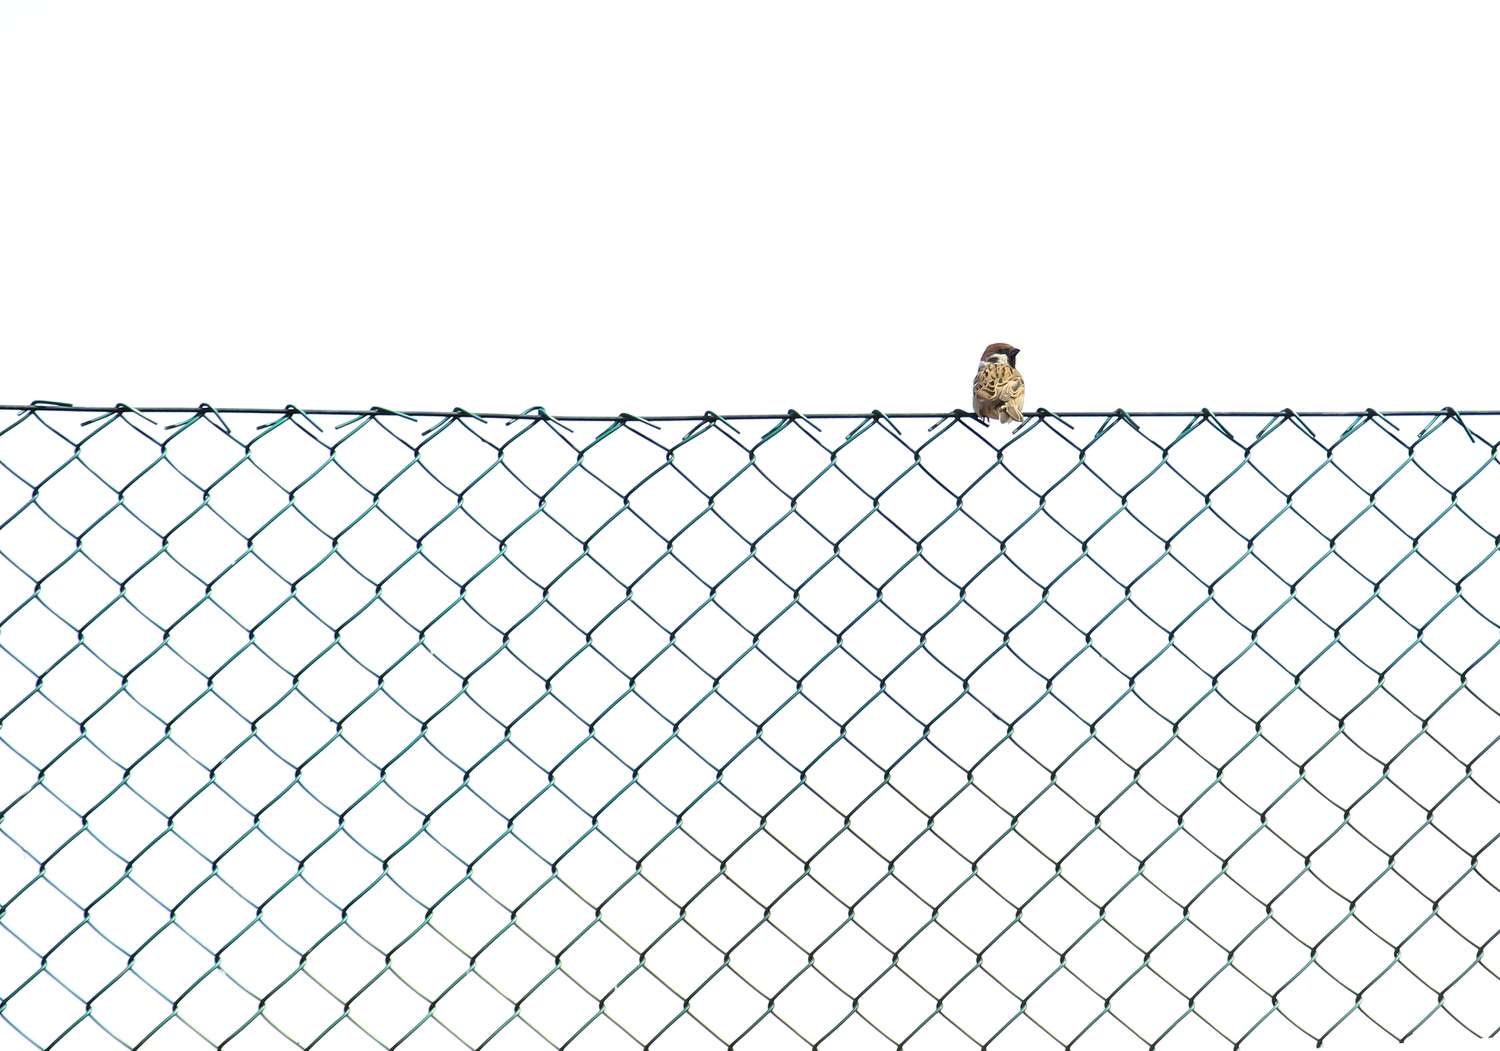 Sparrow Perching On Chainlink Fence Against Clear Sky